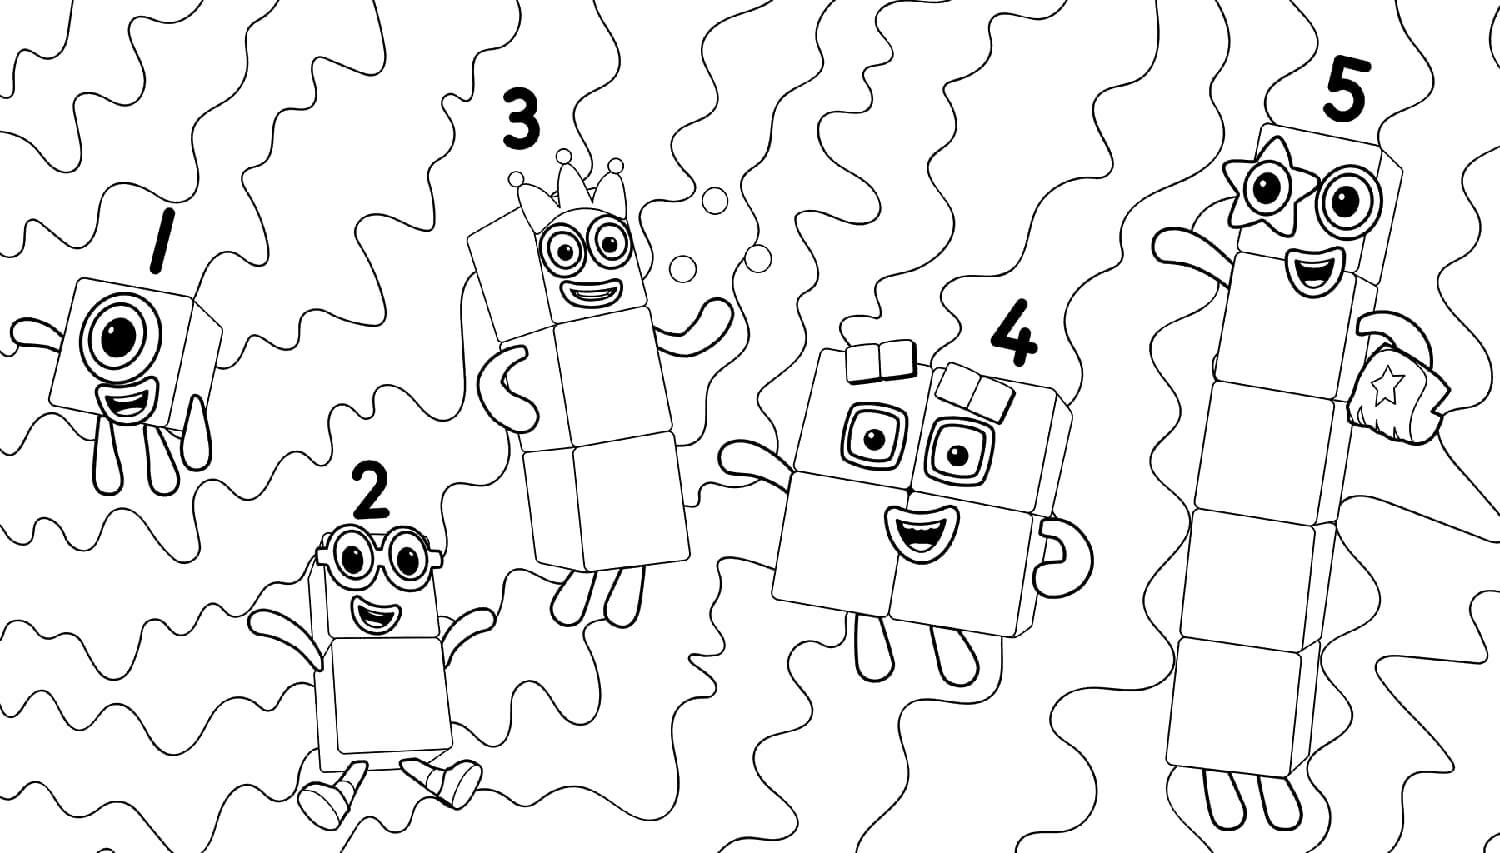 numberblocks from 1 to 5 coloring page free printable coloring pages for kids